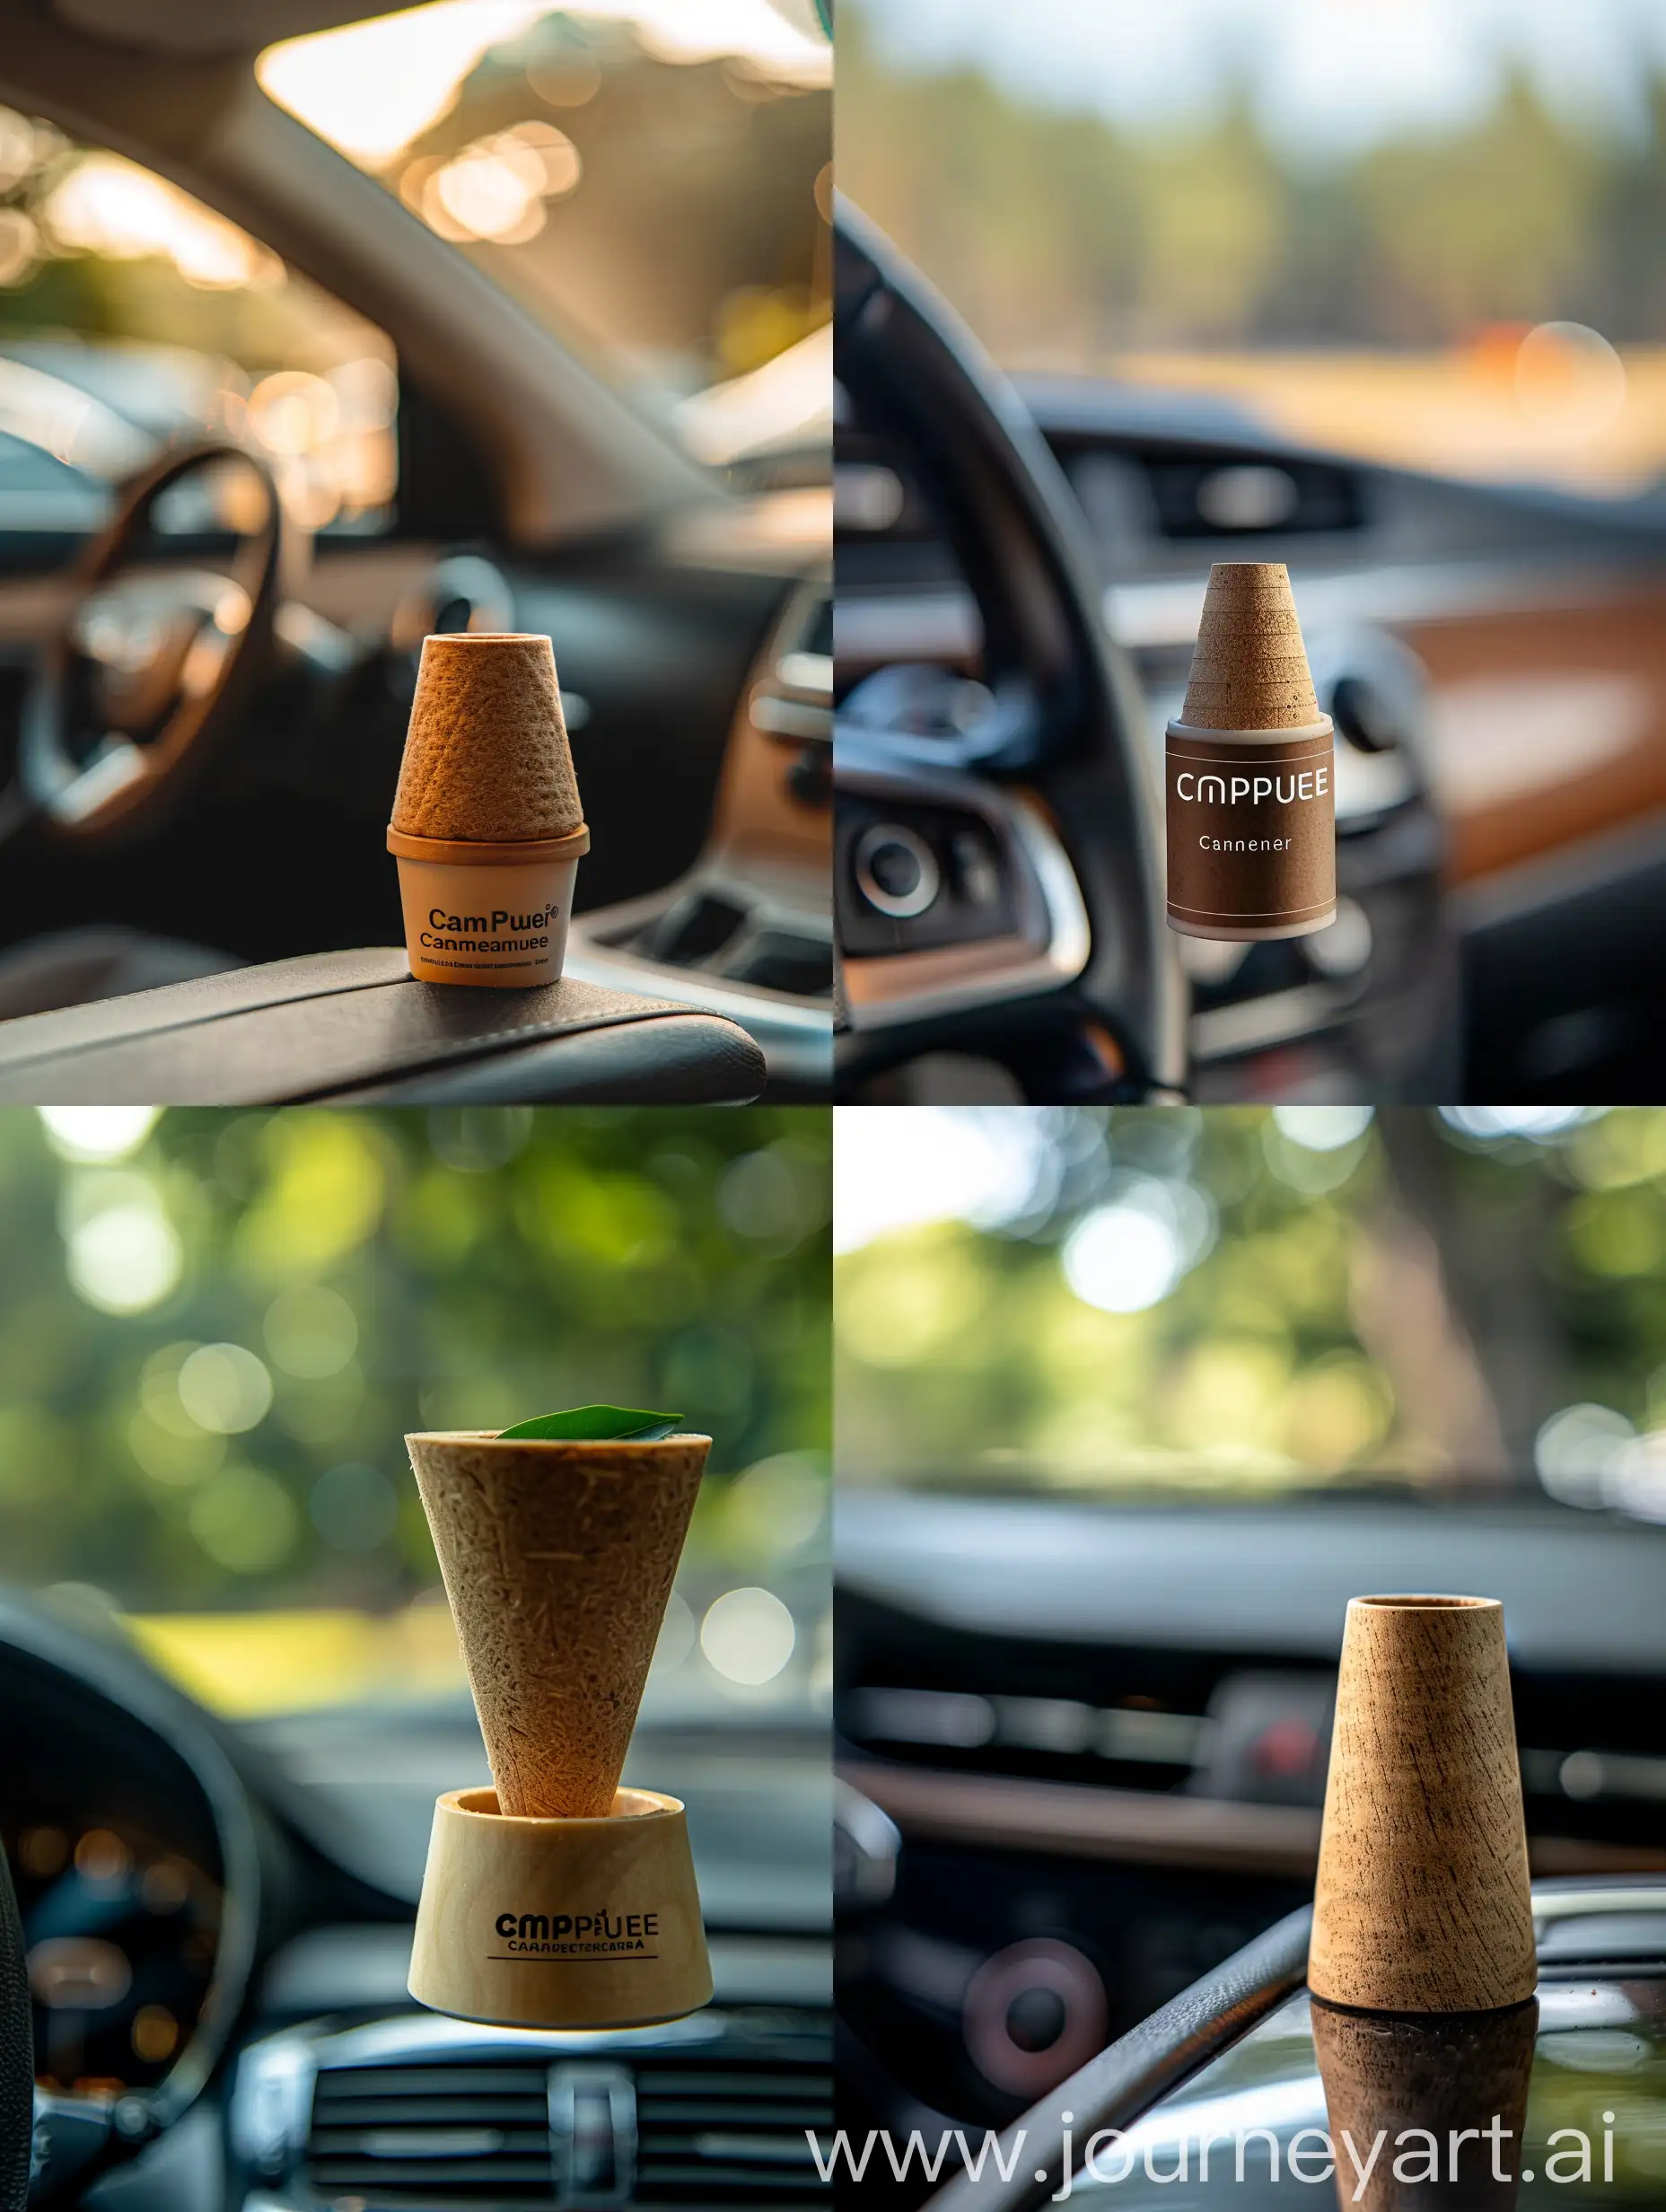 create a static image featuring our product, the CamPure Camphor Cone. As you may know, it's a natural car freshener, perfect for enhancing the ambiance of any vehicle while remaining entirely organic.